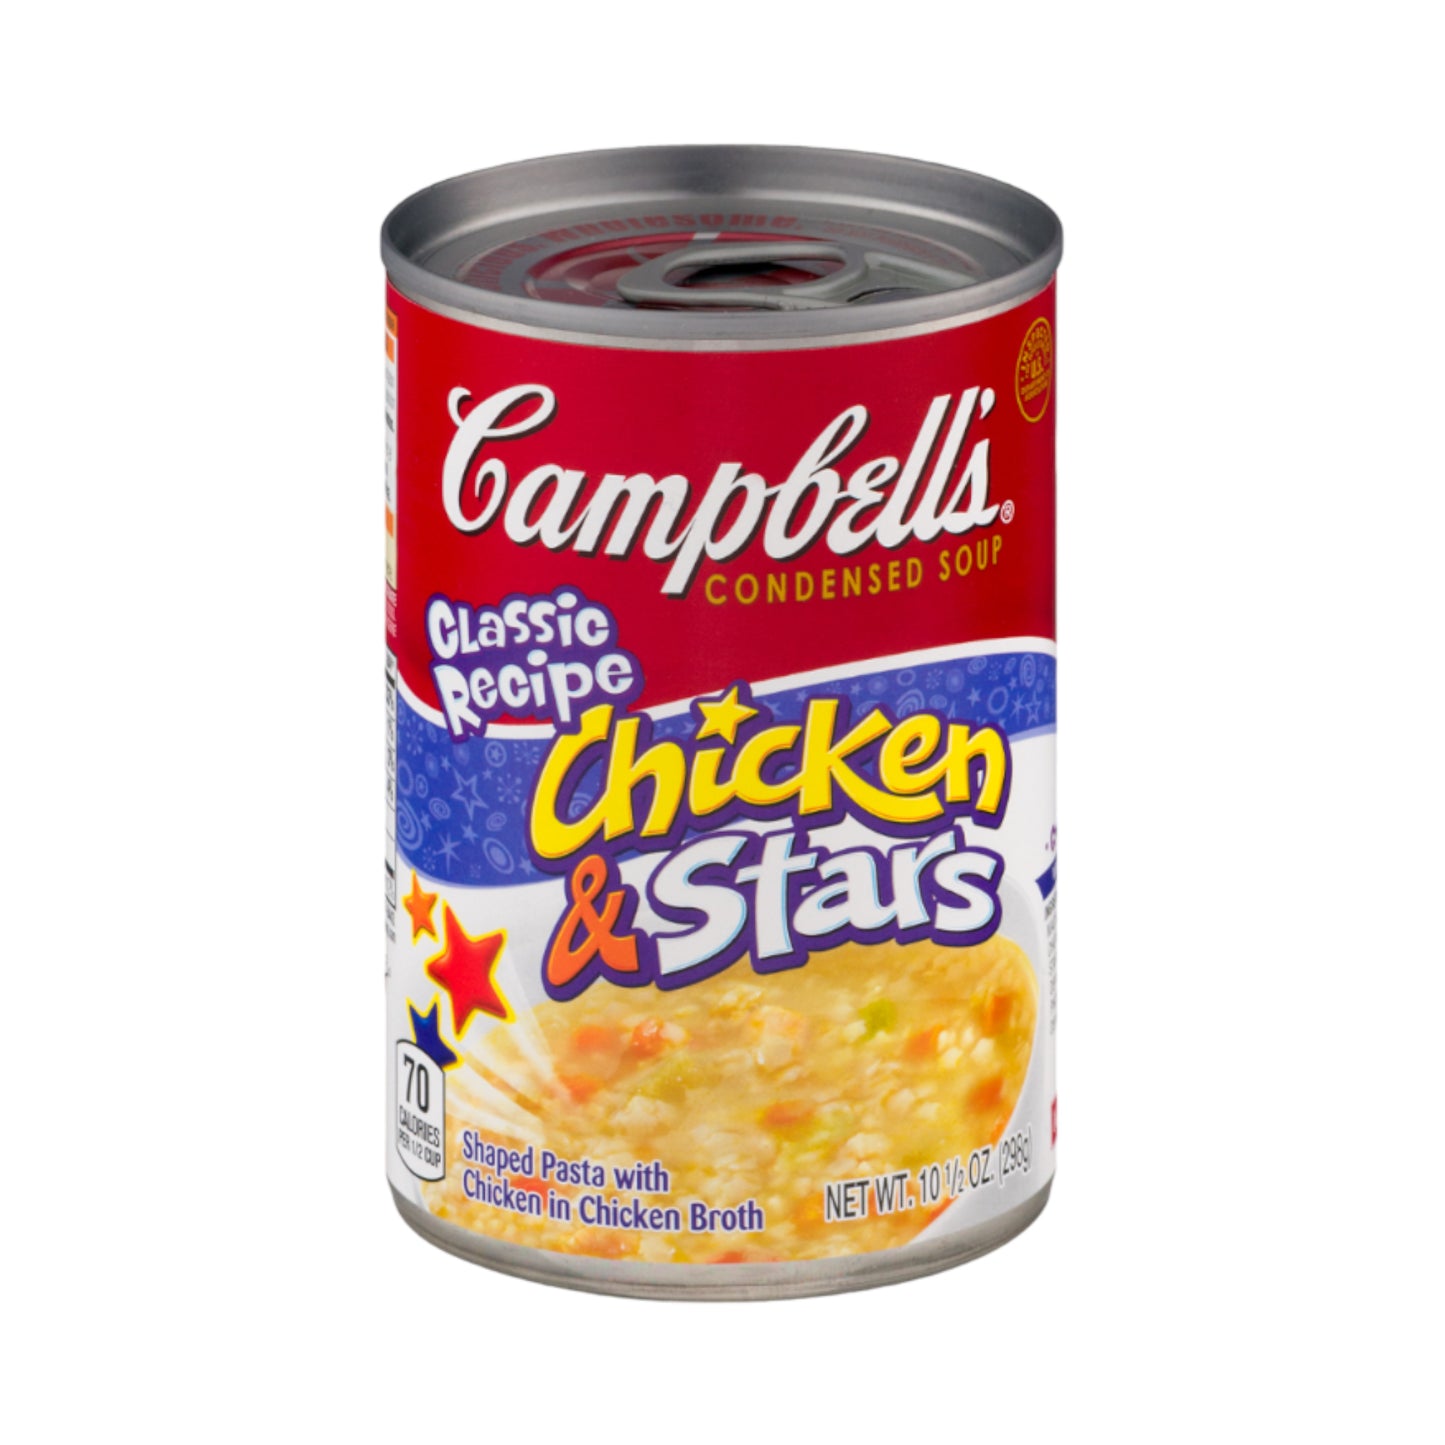 Campbell's Chicken & Stars Soup - 10.5oz (298g)